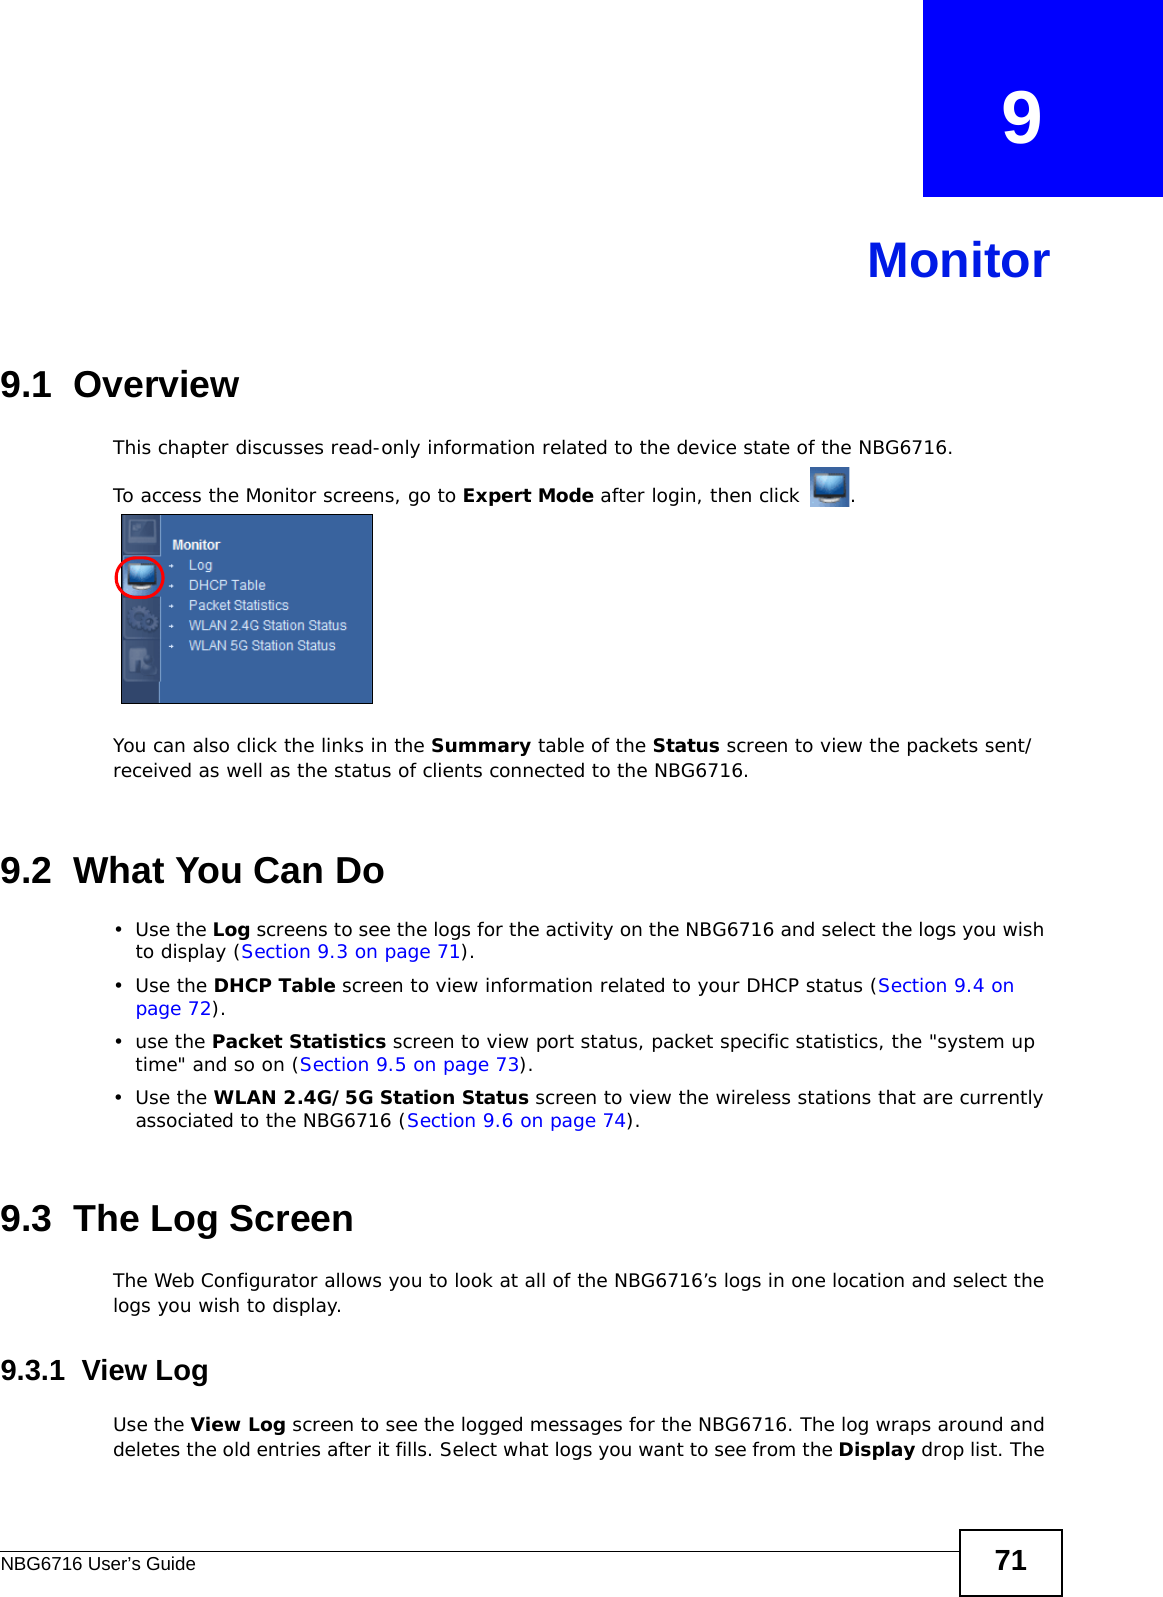 NBG6716 User’s Guide 71CHAPTER   9Monitor9.1  OverviewThis chapter discusses read-only information related to the device state of the NBG6716. To access the Monitor screens, go to Expert Mode after login, then click  .  You can also click the links in the Summary table of the Status screen to view the packets sent/received as well as the status of clients connected to the NBG6716.9.2  What You Can Do•Use the Log screens to see the logs for the activity on the NBG6716 and select the logs you wish to display (Section 9.3 on page 71).•Use the DHCP Table screen to view information related to your DHCP status (Section 9.4 on page 72).•use the Packet Statistics screen to view port status, packet specific statistics, the &quot;system up time&quot; and so on (Section 9.5 on page 73).•Use the WLAN 2.4G/5G Station Status screen to view the wireless stations that are currently associated to the NBG6716 (Section 9.6 on page 74).9.3  The Log ScreenThe Web Configurator allows you to look at all of the NBG6716’s logs in one location and select the logs you wish to display.9.3.1  View LogUse the View Log screen to see the logged messages for the NBG6716. The log wraps around and deletes the old entries after it fills. Select what logs you want to see from the Display drop list. The 